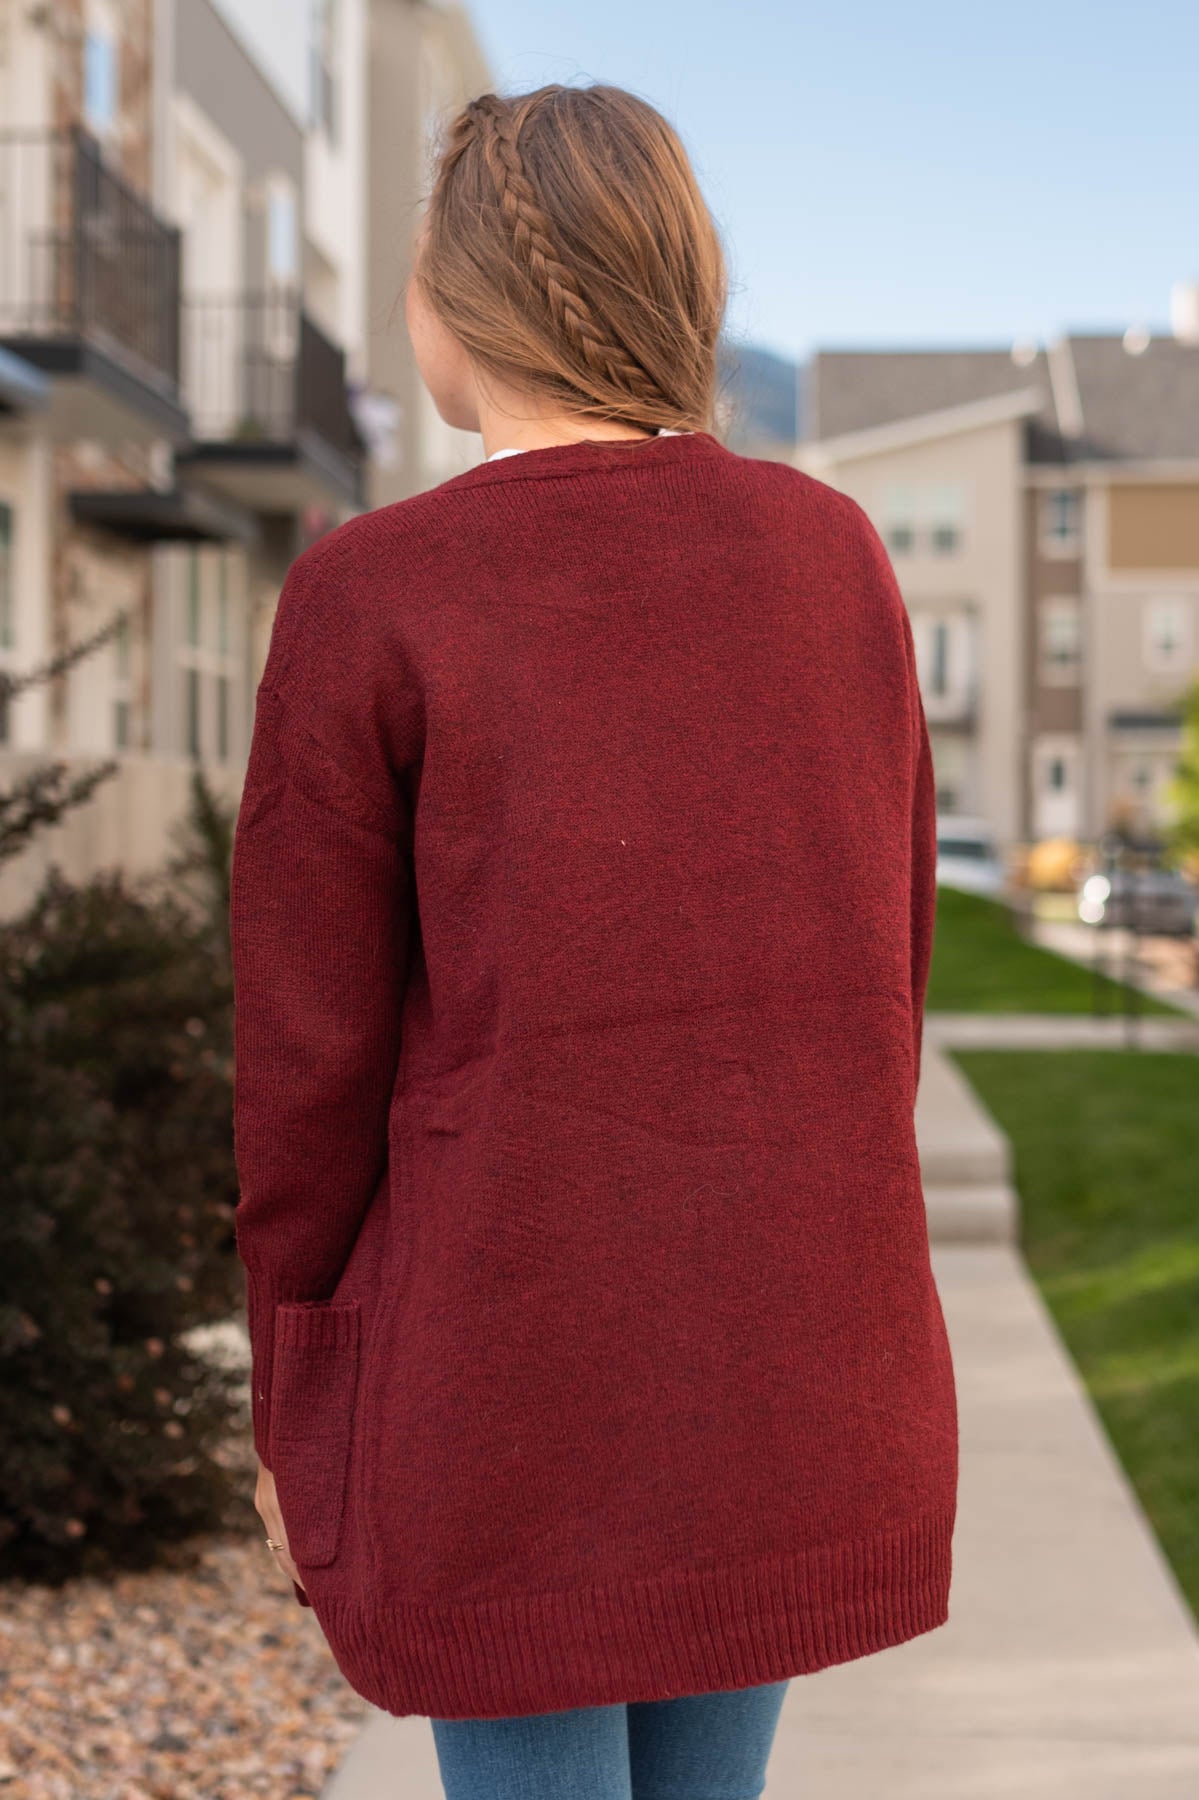 Back view of a burgundy cardigan